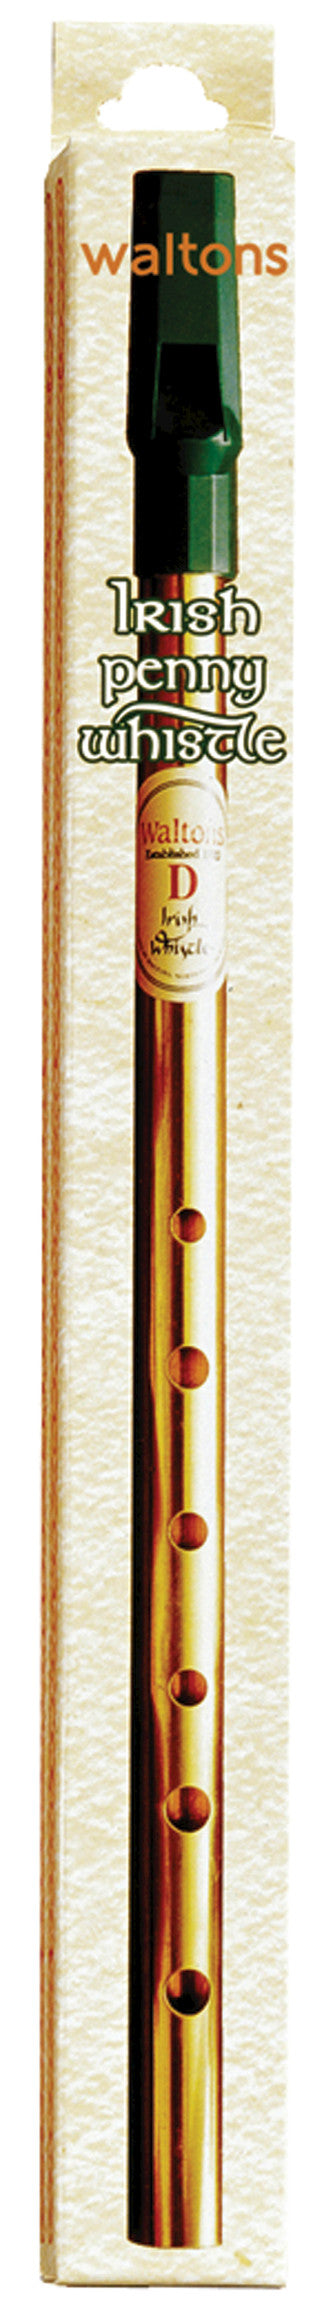 Irish Penny Whistle in D